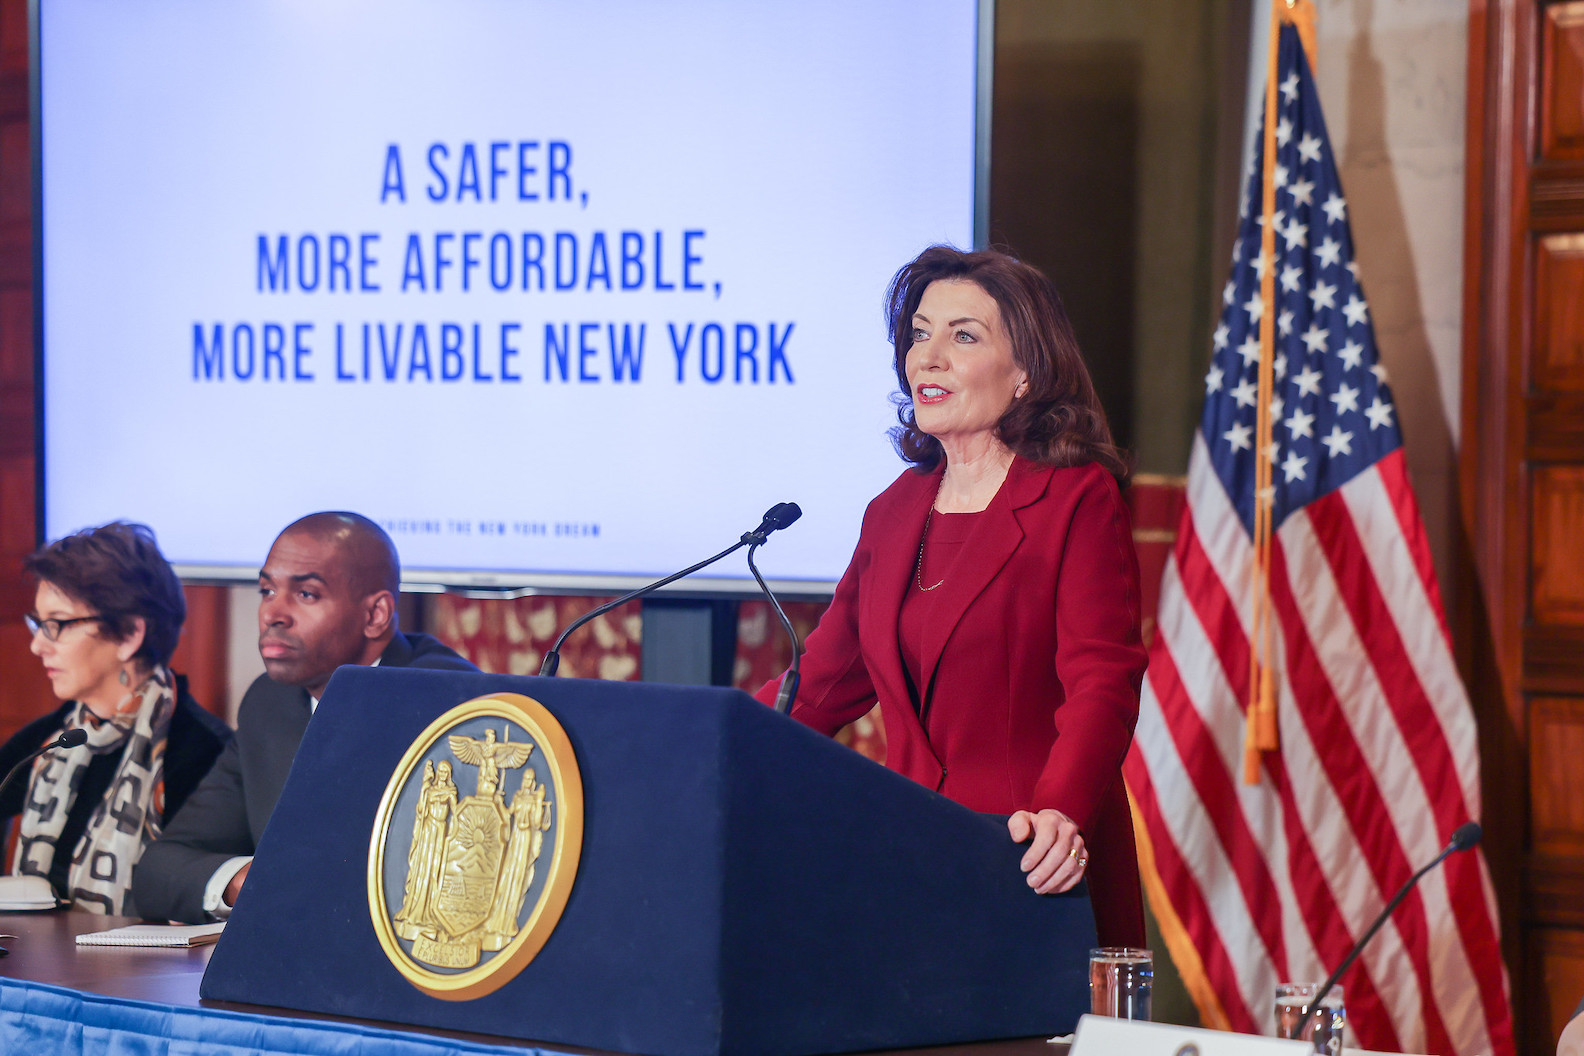 Hochul announces highlights of executive budget